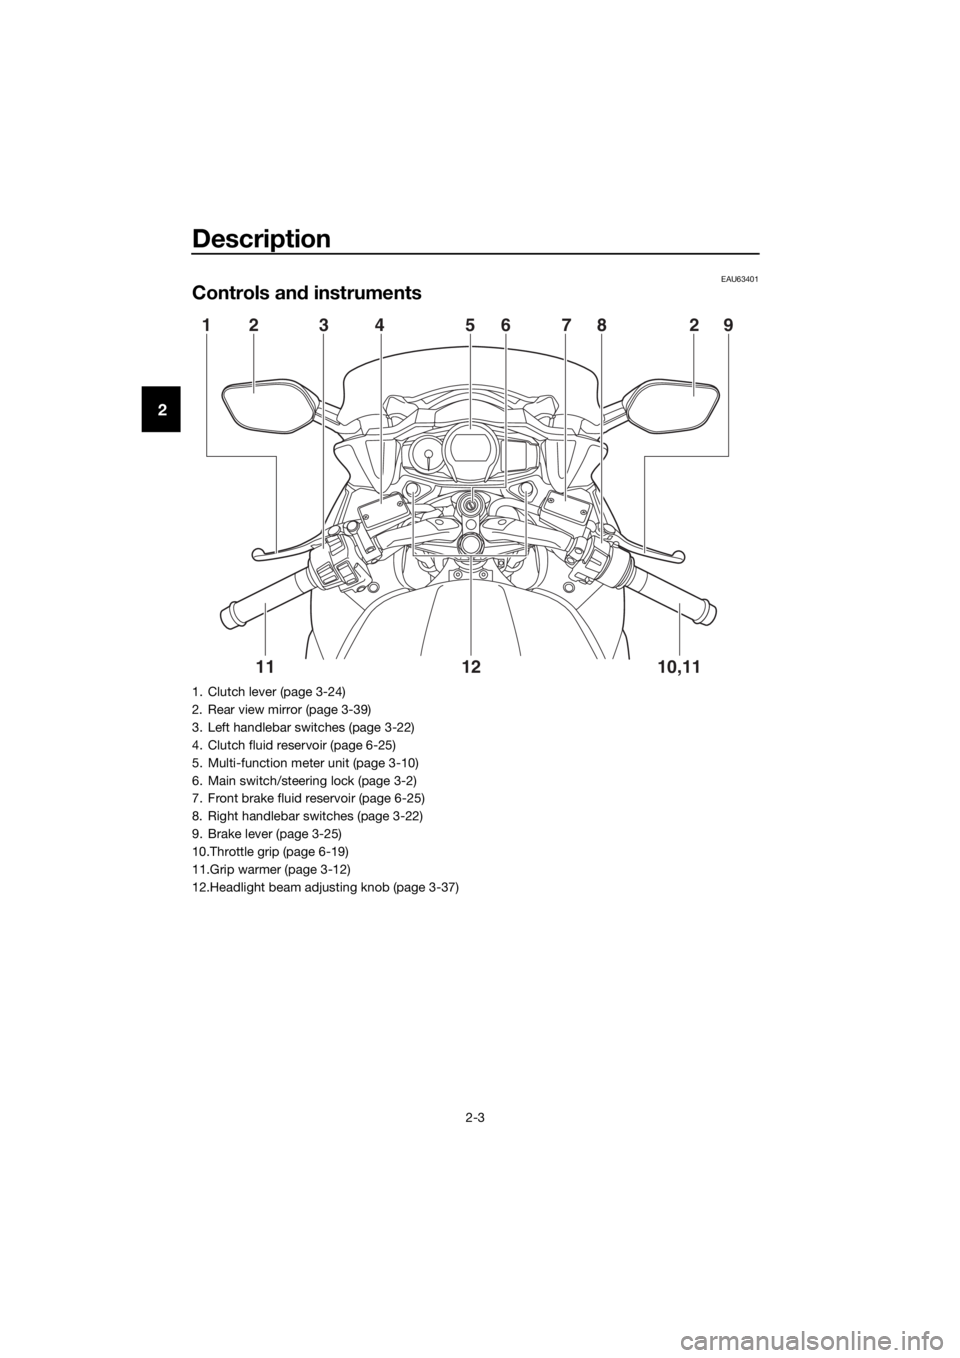 YAMAHA FJR1300A 2016 User Guide Description
2-3
2
EAU63401
Controls and instruments
12 3 4 5678 29
10,11
12
11
1. Clutch lever (page 3-24)
2. Rear view mirror (page 3-39)
3. Left handlebar switches (page 3-22)
4. Clutch fluid reserv